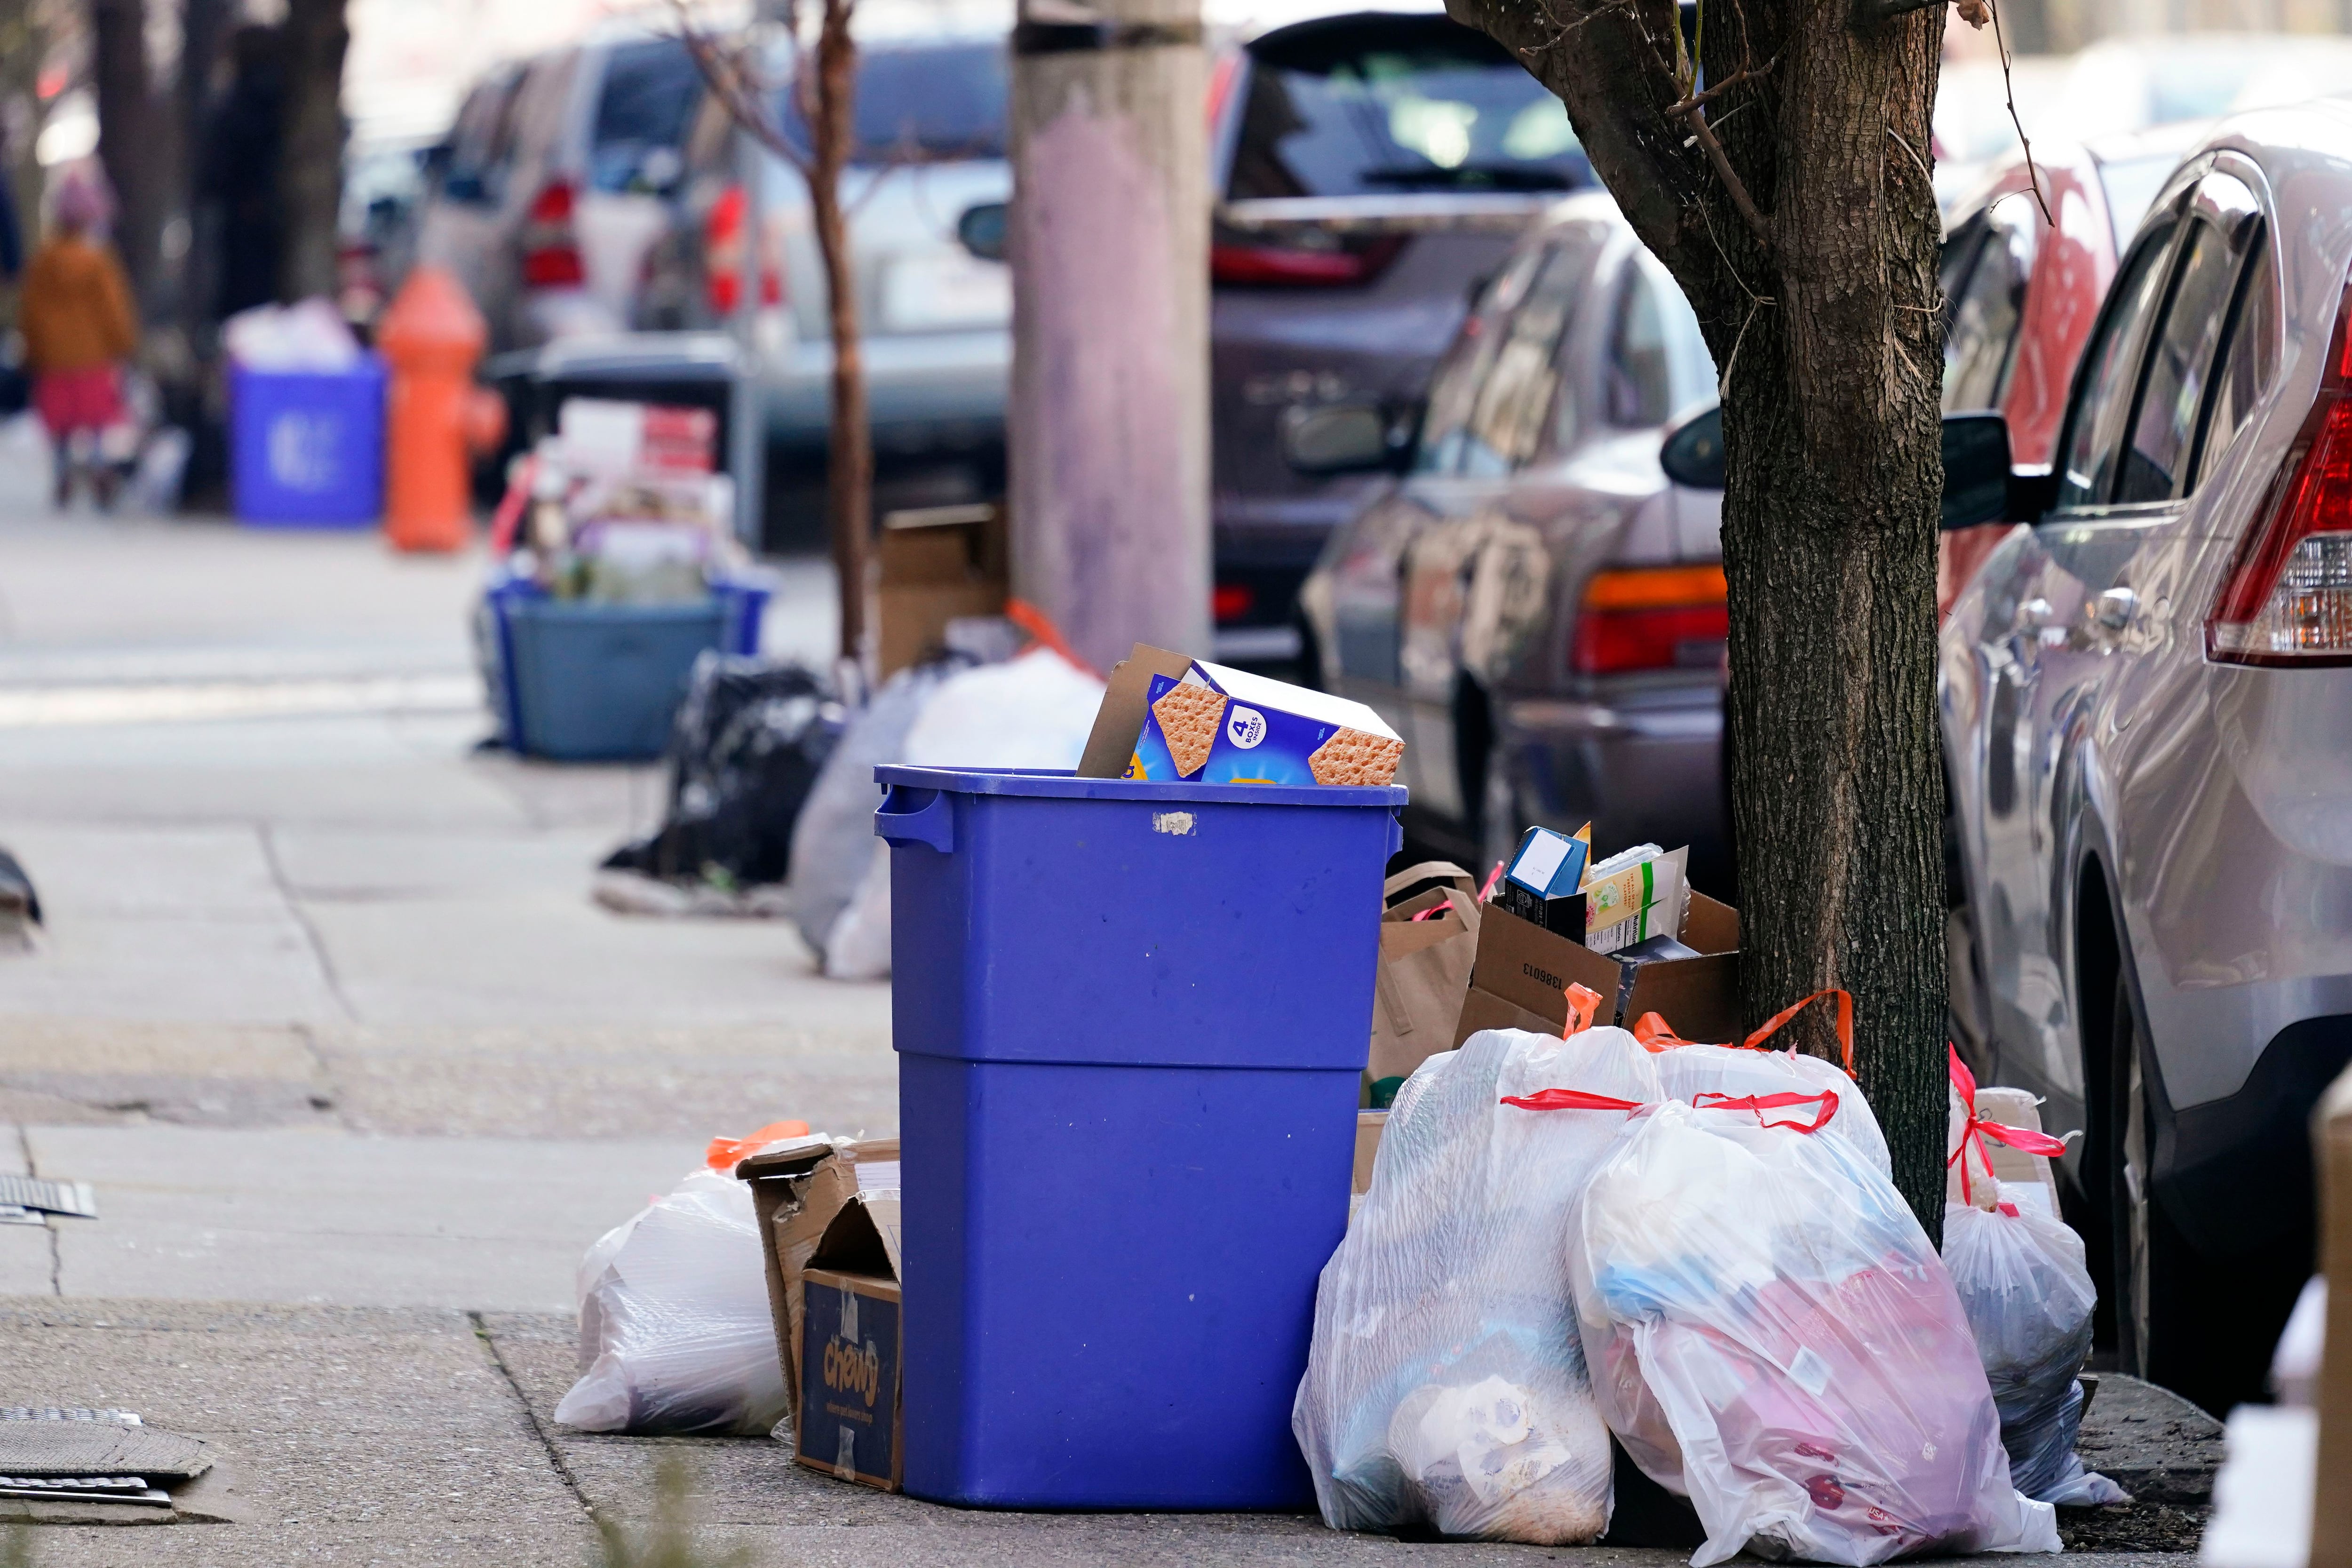 The omicron variant is making so many sanitation workers sick in the US that waste collection in Philadelphia and other cities has been delayed or suspended.  (Photo: AP/Matt Rourke)